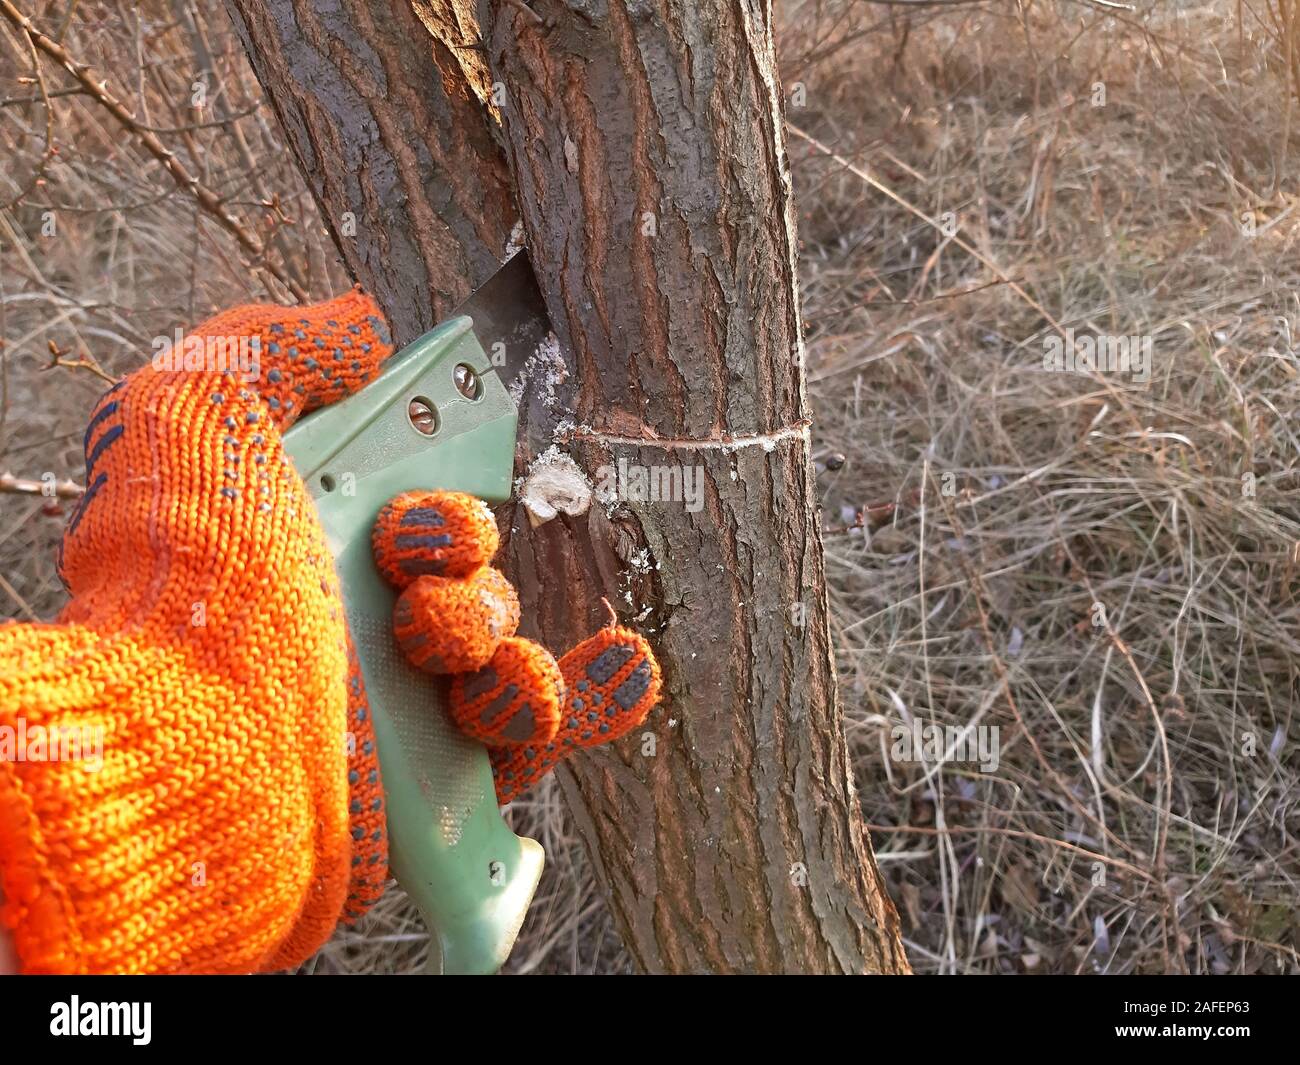 Cutting young tree with the saw. Cutting unnecessary branches Stock Photo